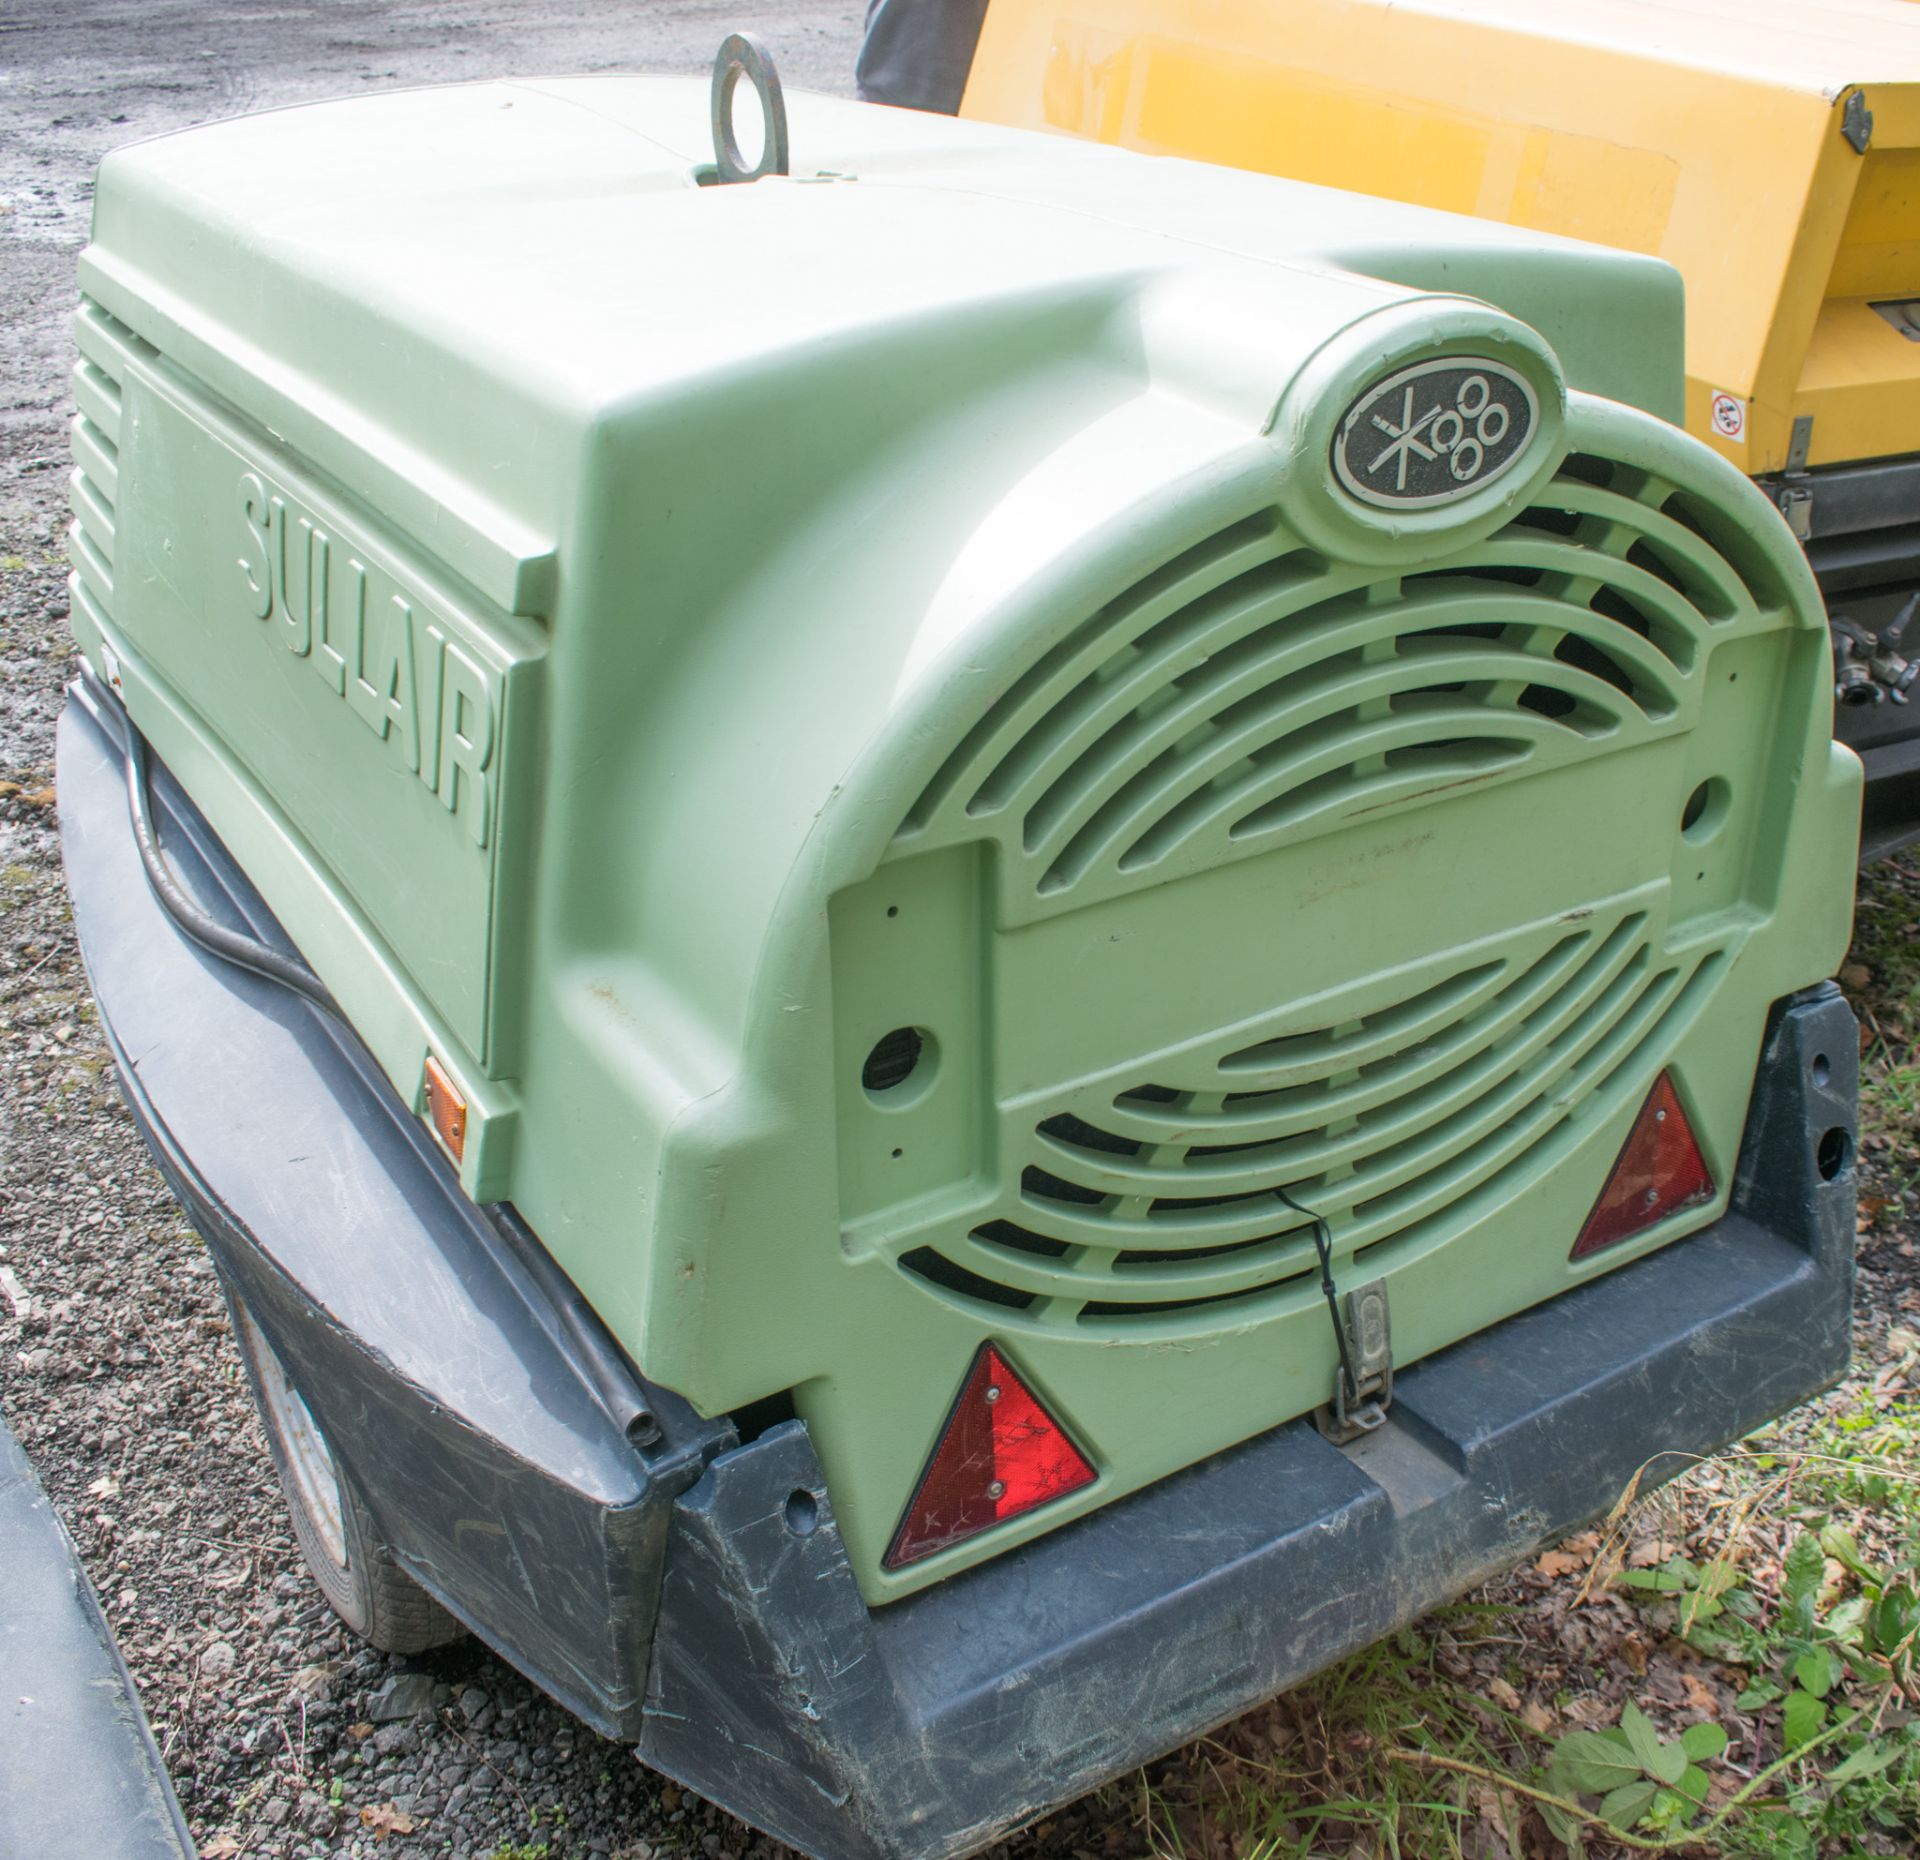 SULLAIR 48K diesel driven mobile air compressor Year: 2007 S/N: 348805 Recorded hours: 957 1016 - Image 2 of 4